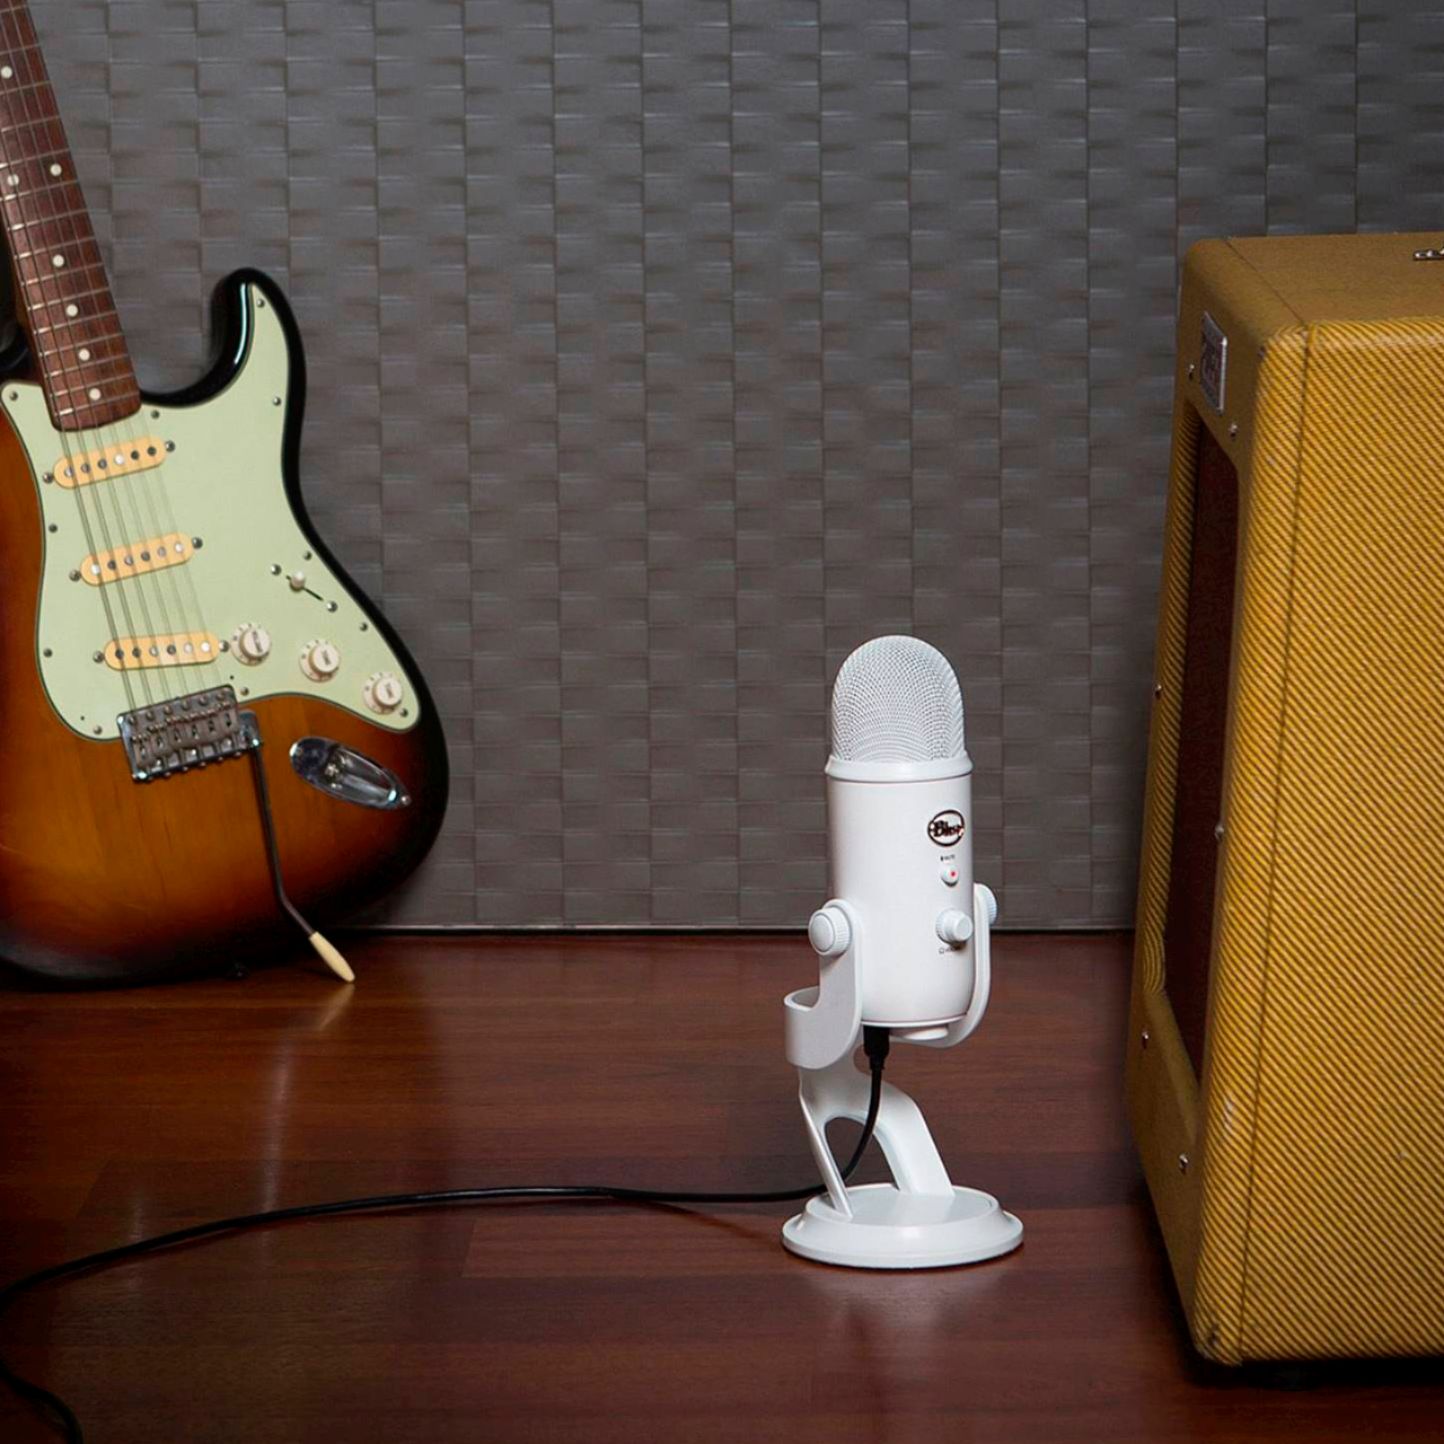 Blue Microphones Yeti - Microphone - USB - whiteout